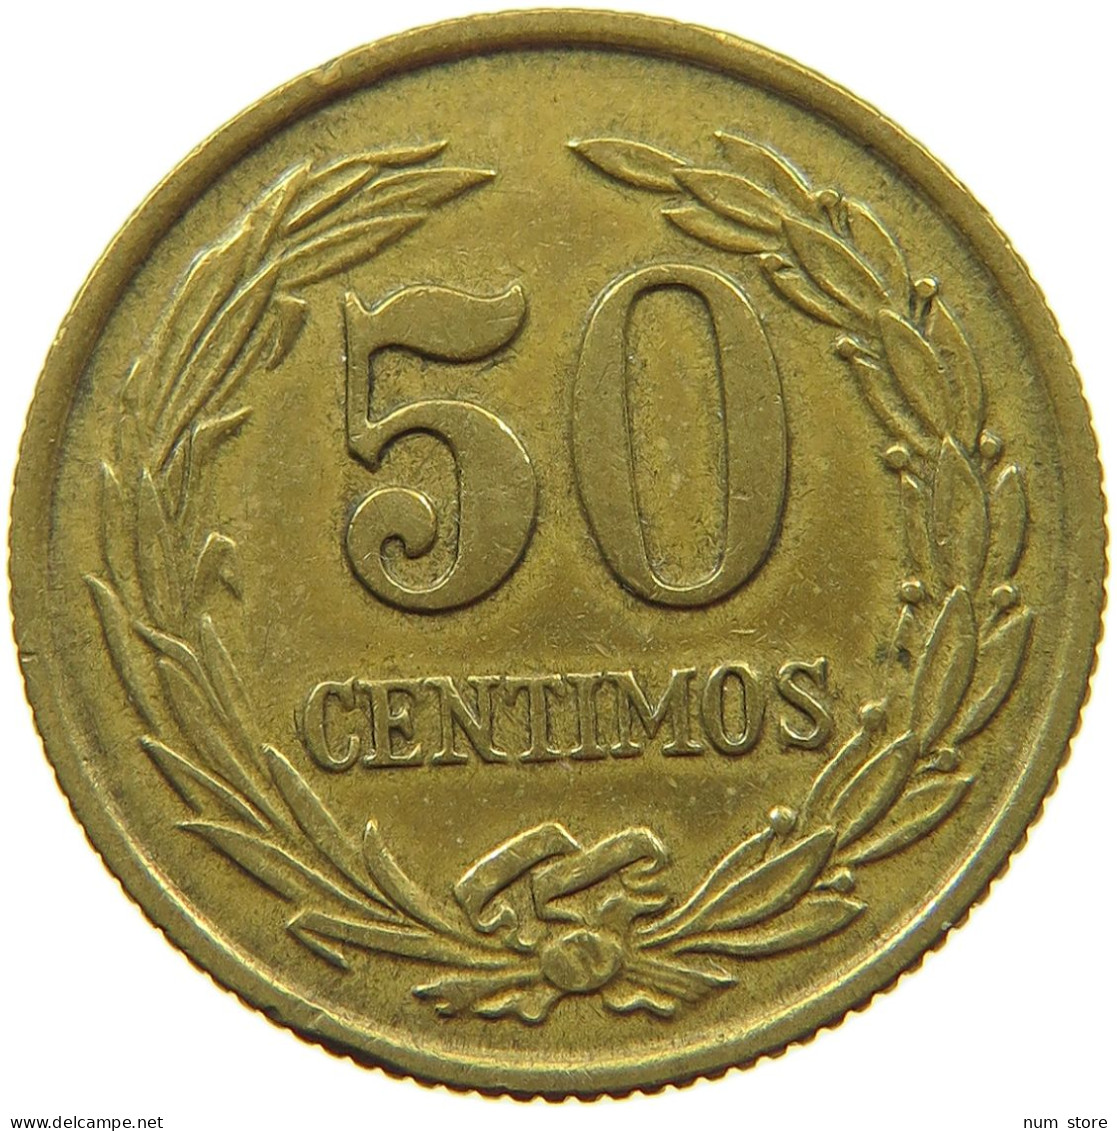 PARAGUAY 50 CENTIMOS 1951  #s066 0303 - Paraguay